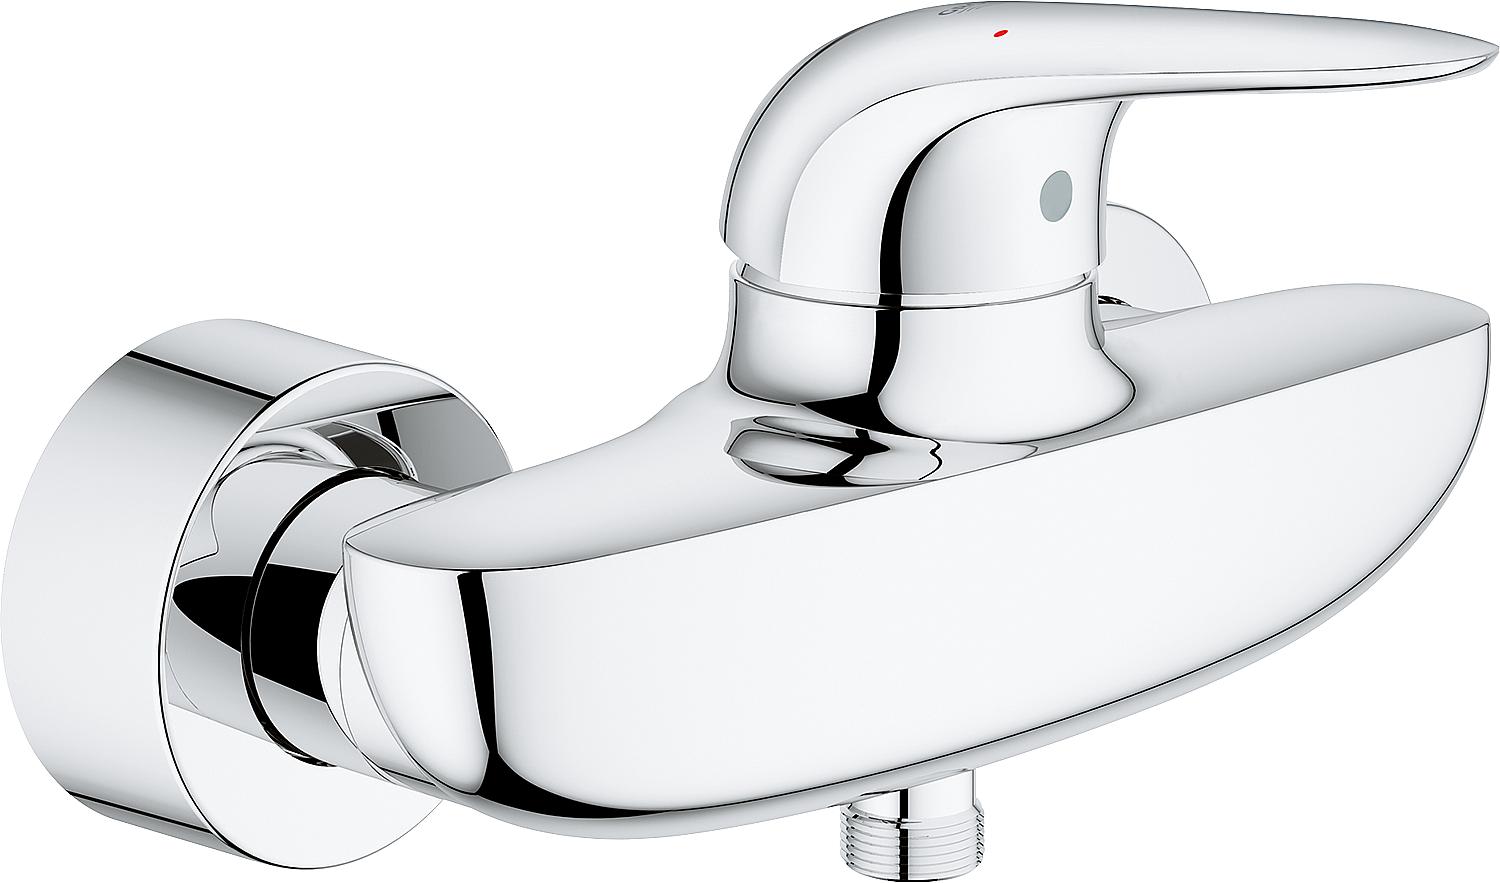 asdec life ® shower mixer Grohe Eurostyle chrome-plated, closed lever, exposed